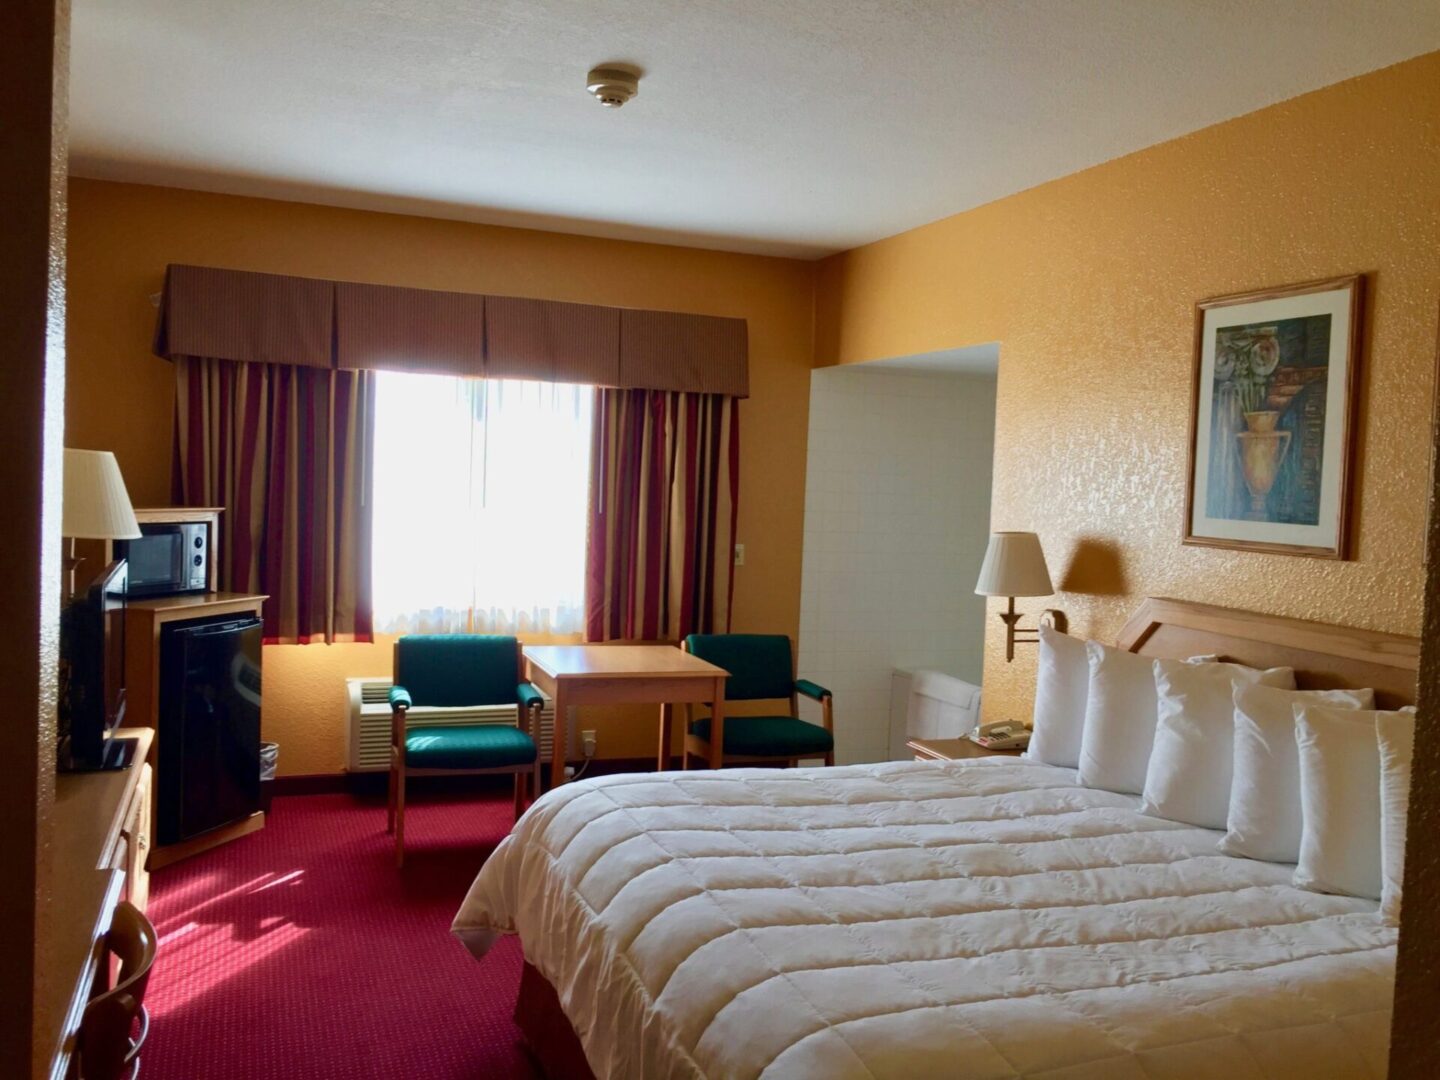 Hotel bedroom with a wide window along with a big bed